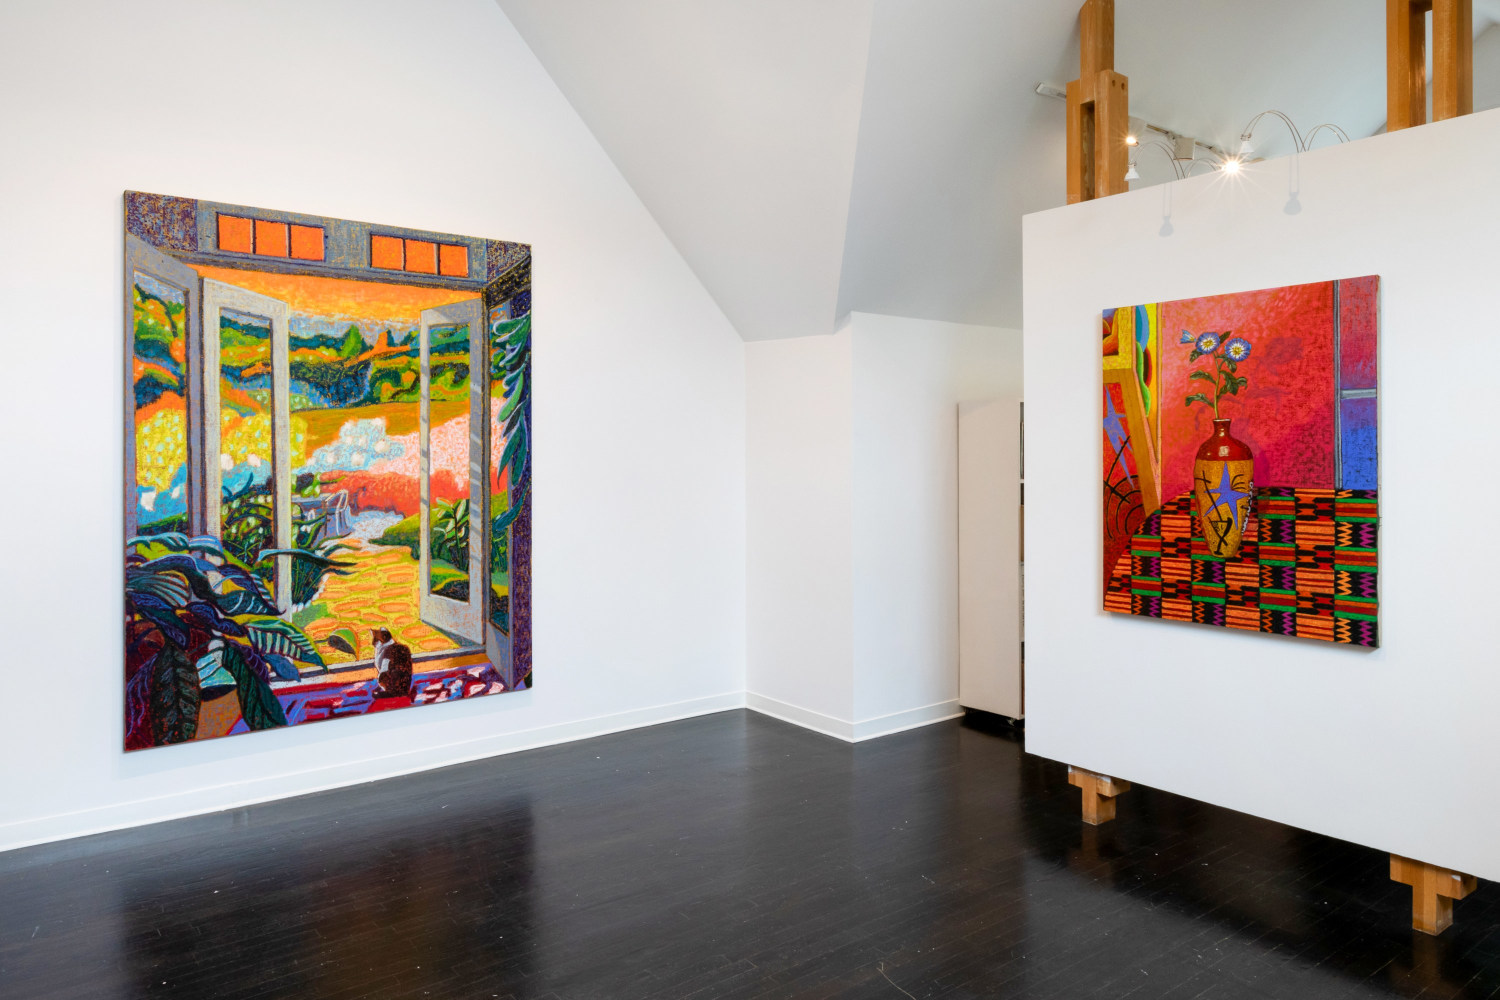 JJ Manford: The Golden Pheasant at Flamingo Estate + Other Tales of Wanderlust (installation view)